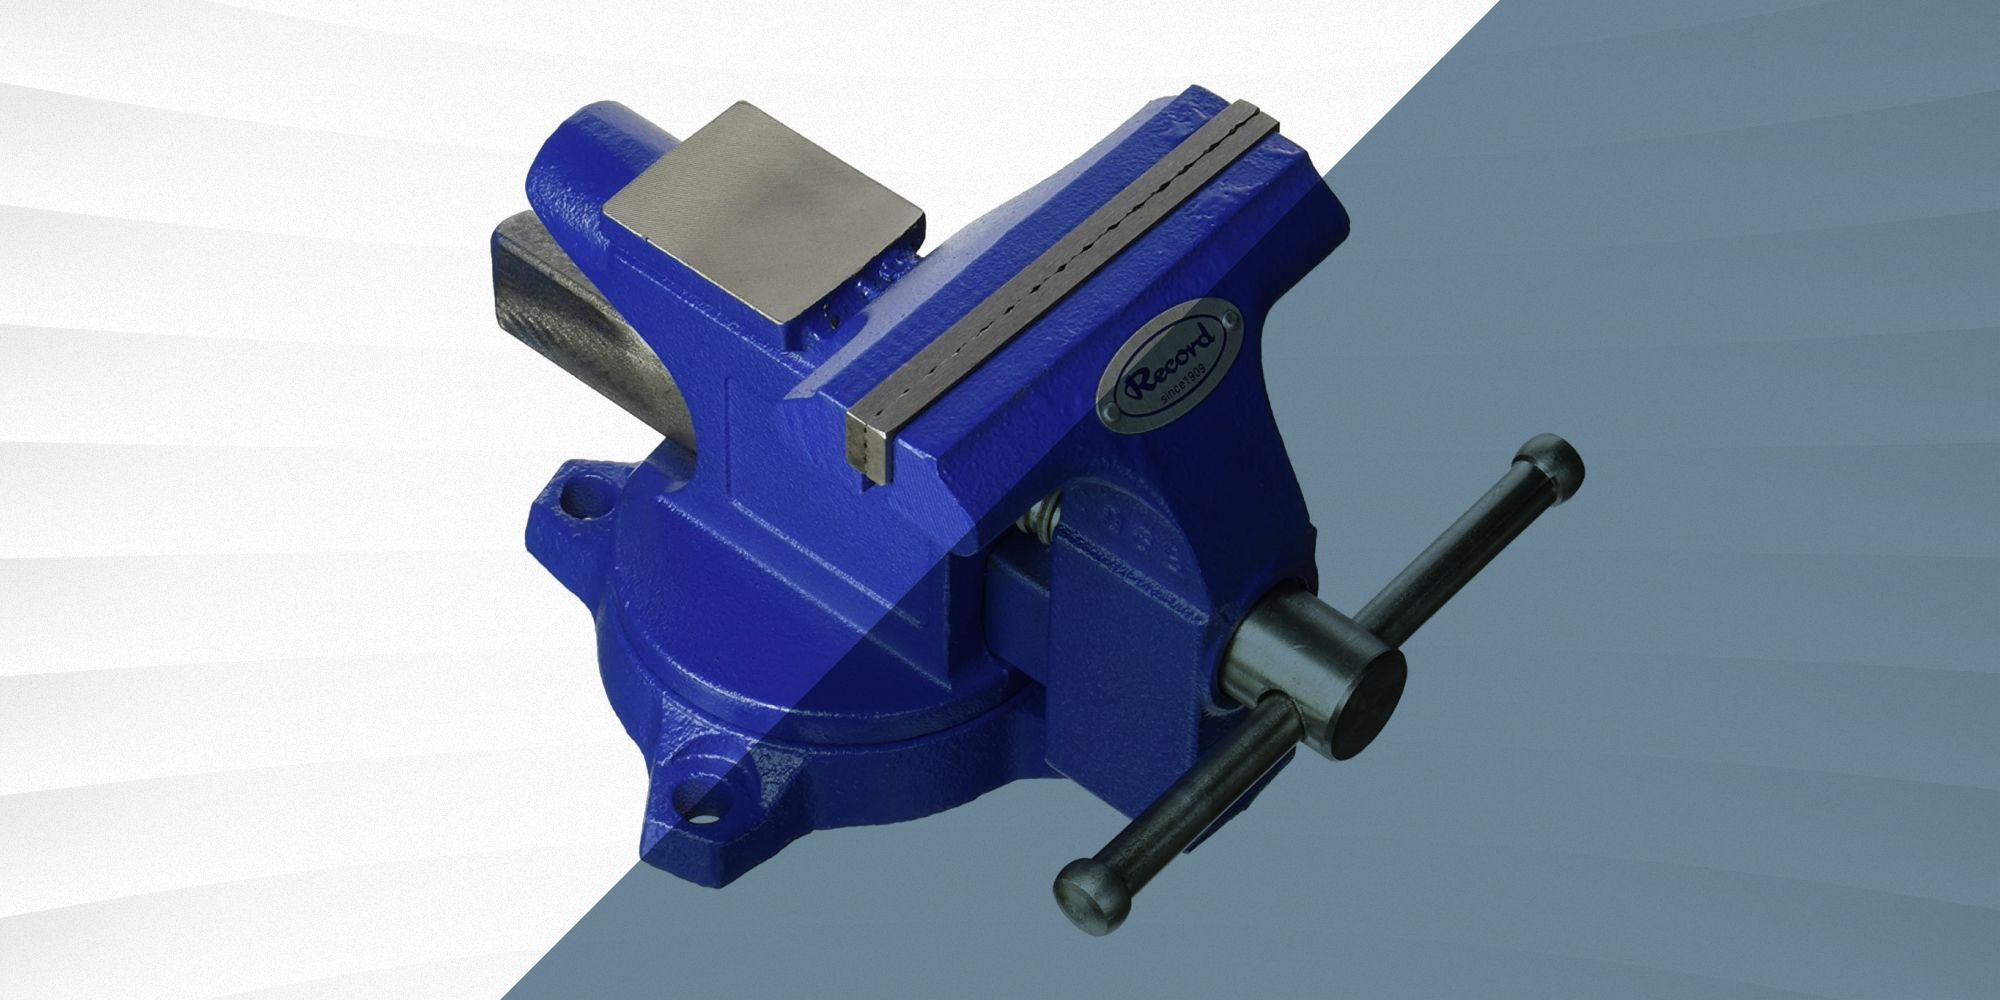 Bench Vise Heavy Duty Work Bench Table Vise Miniature Vise Wood Carving  Vise Blue Workbench All Steel Repair Tool To Rotate Pipe Vice Woodworking 